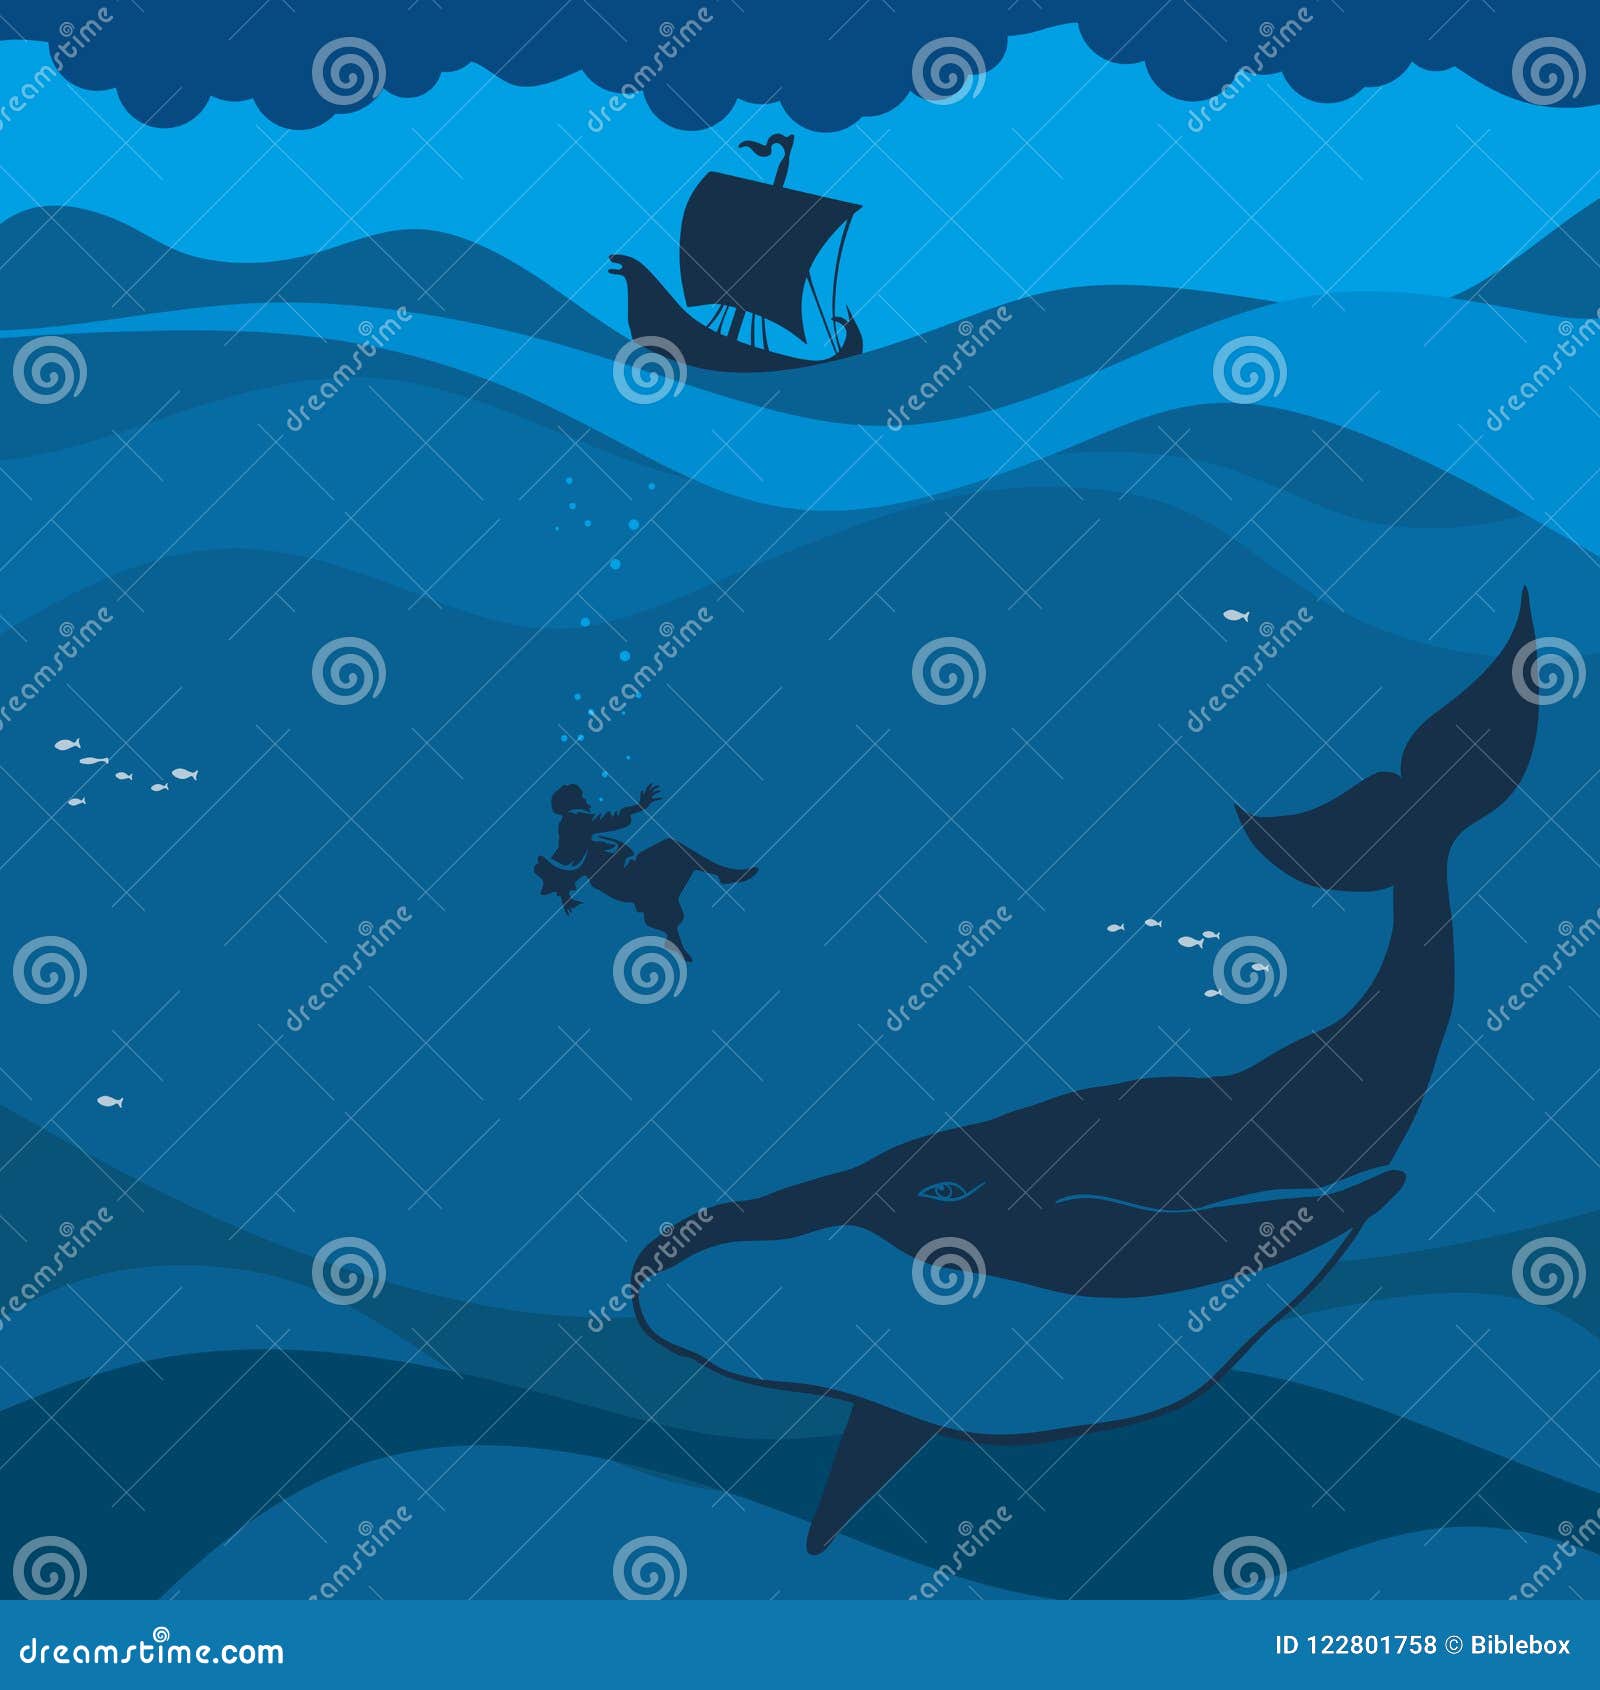 biblical . jonah in the sea abyss, the whale swallowed it